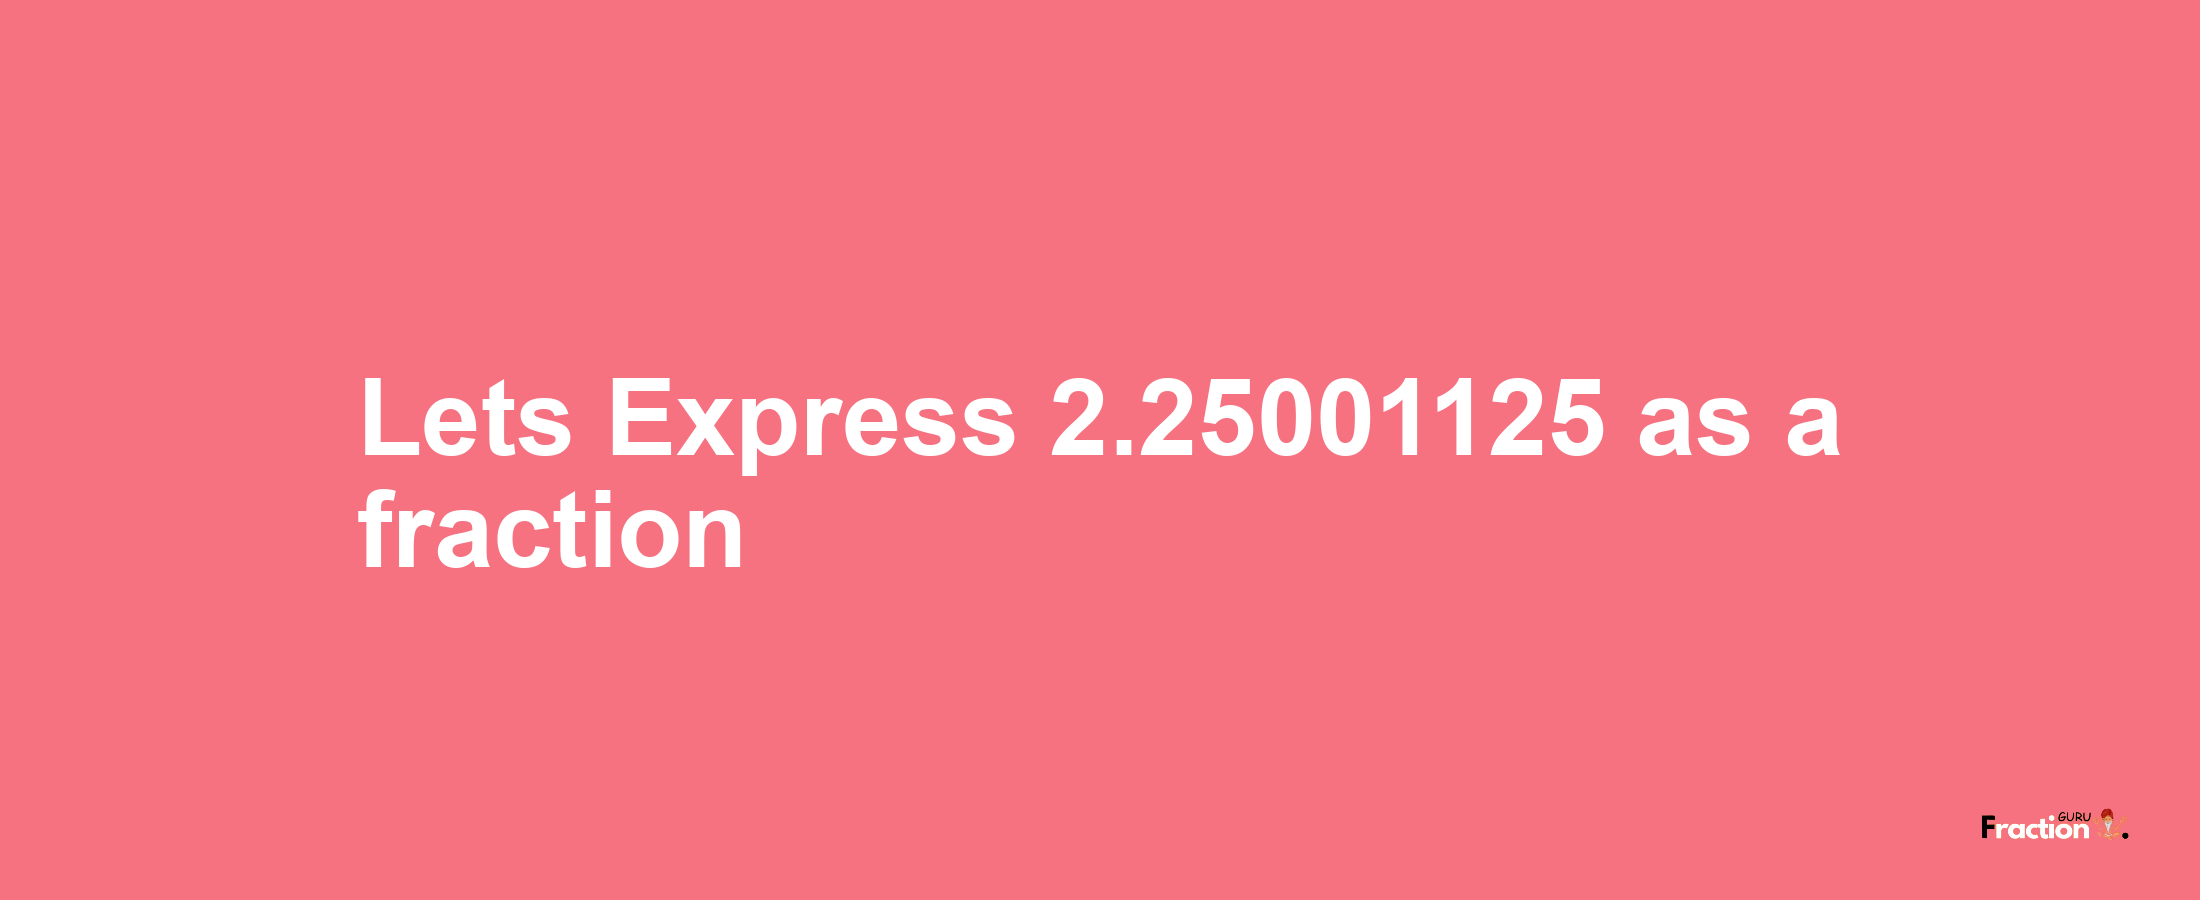 Lets Express 2.25001125 as afraction